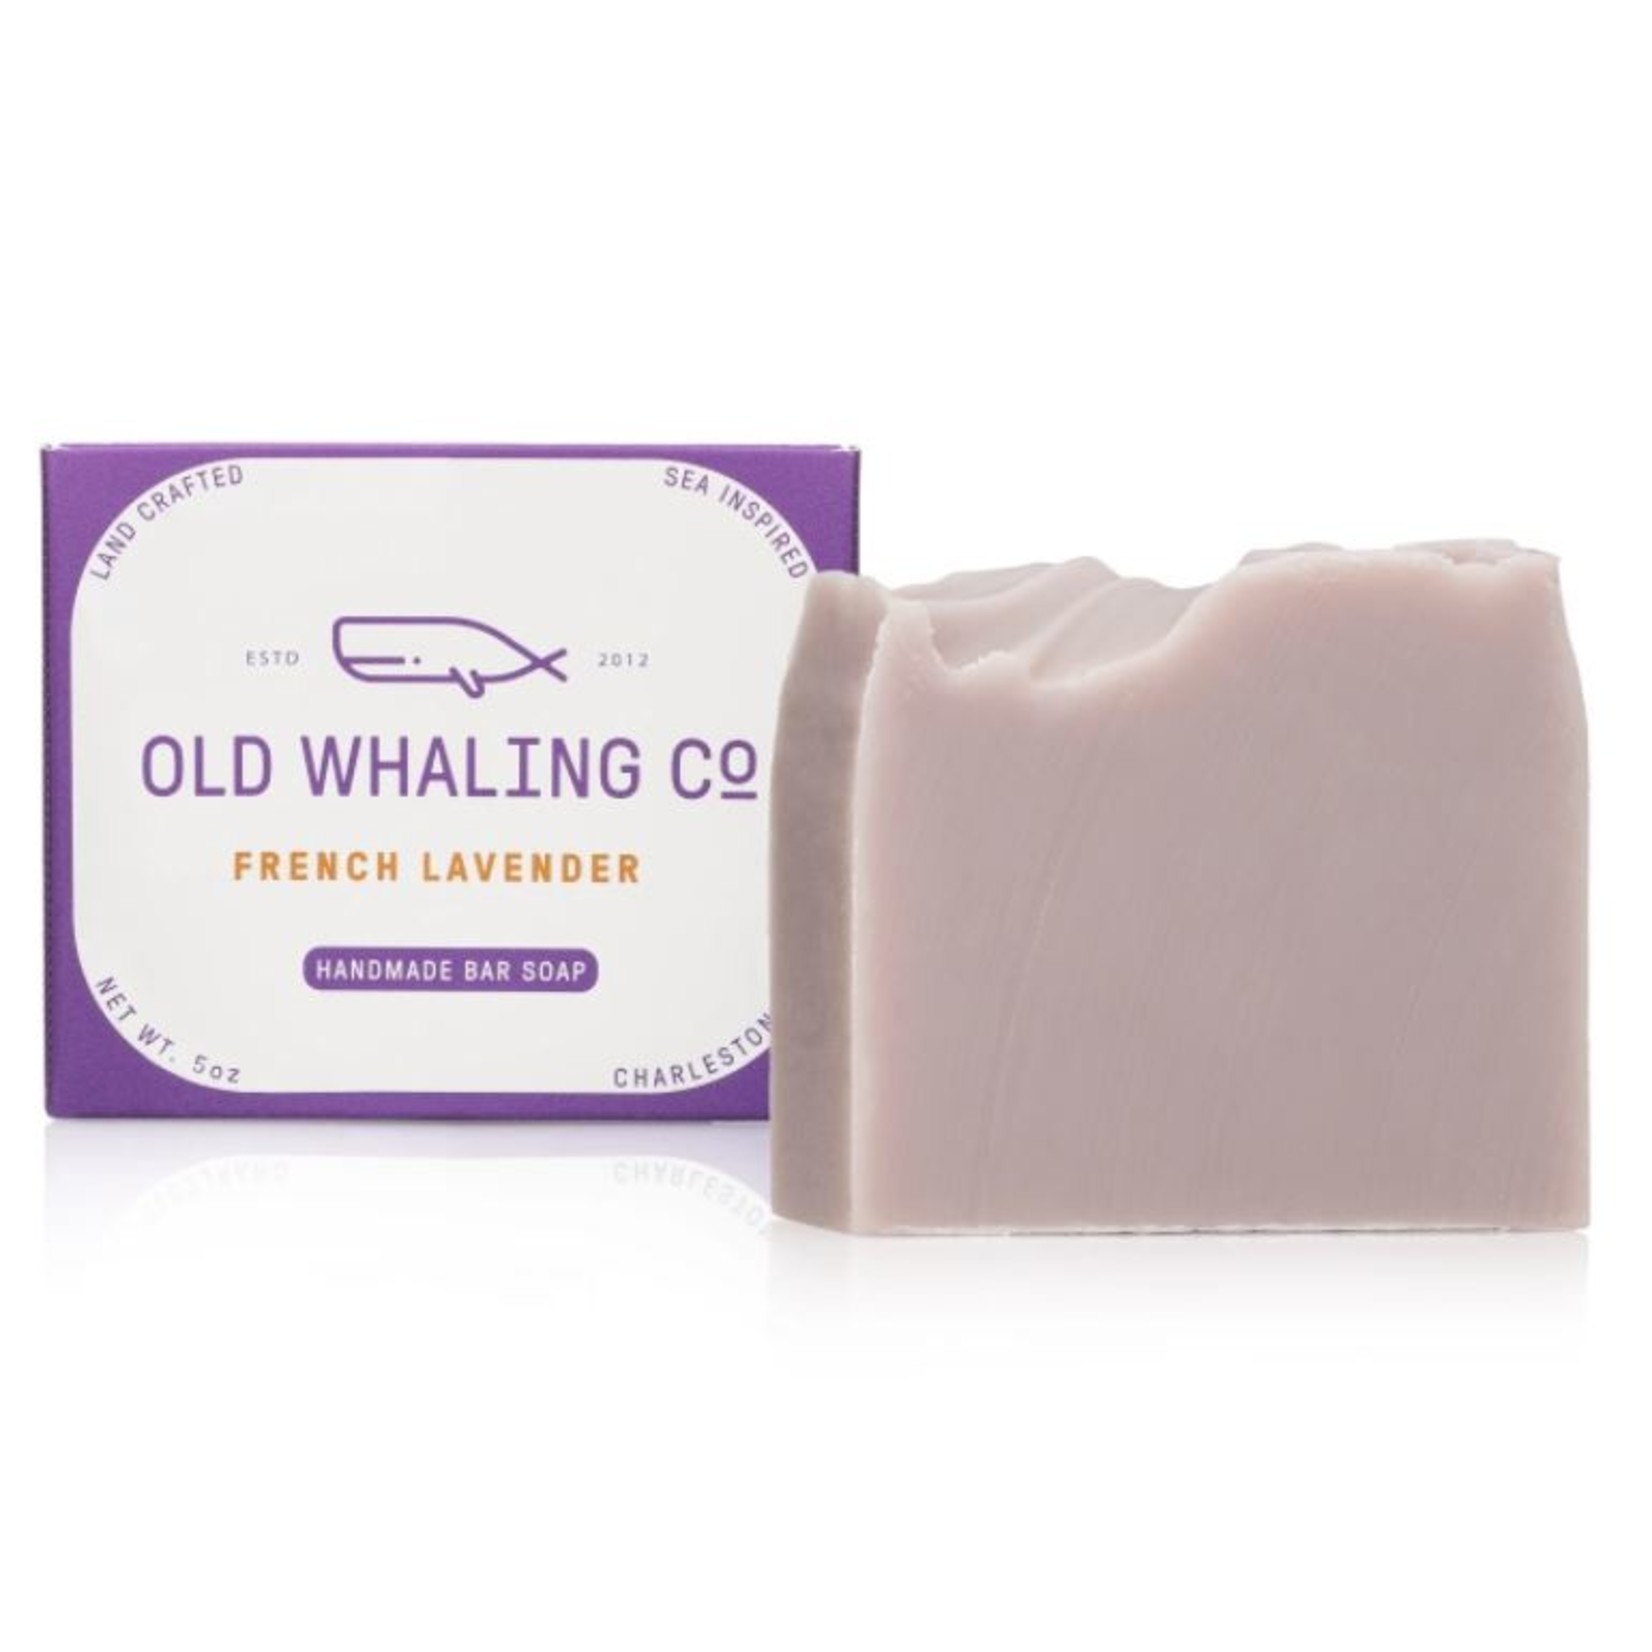 Old Whaling Company French Lavender Bar Soap